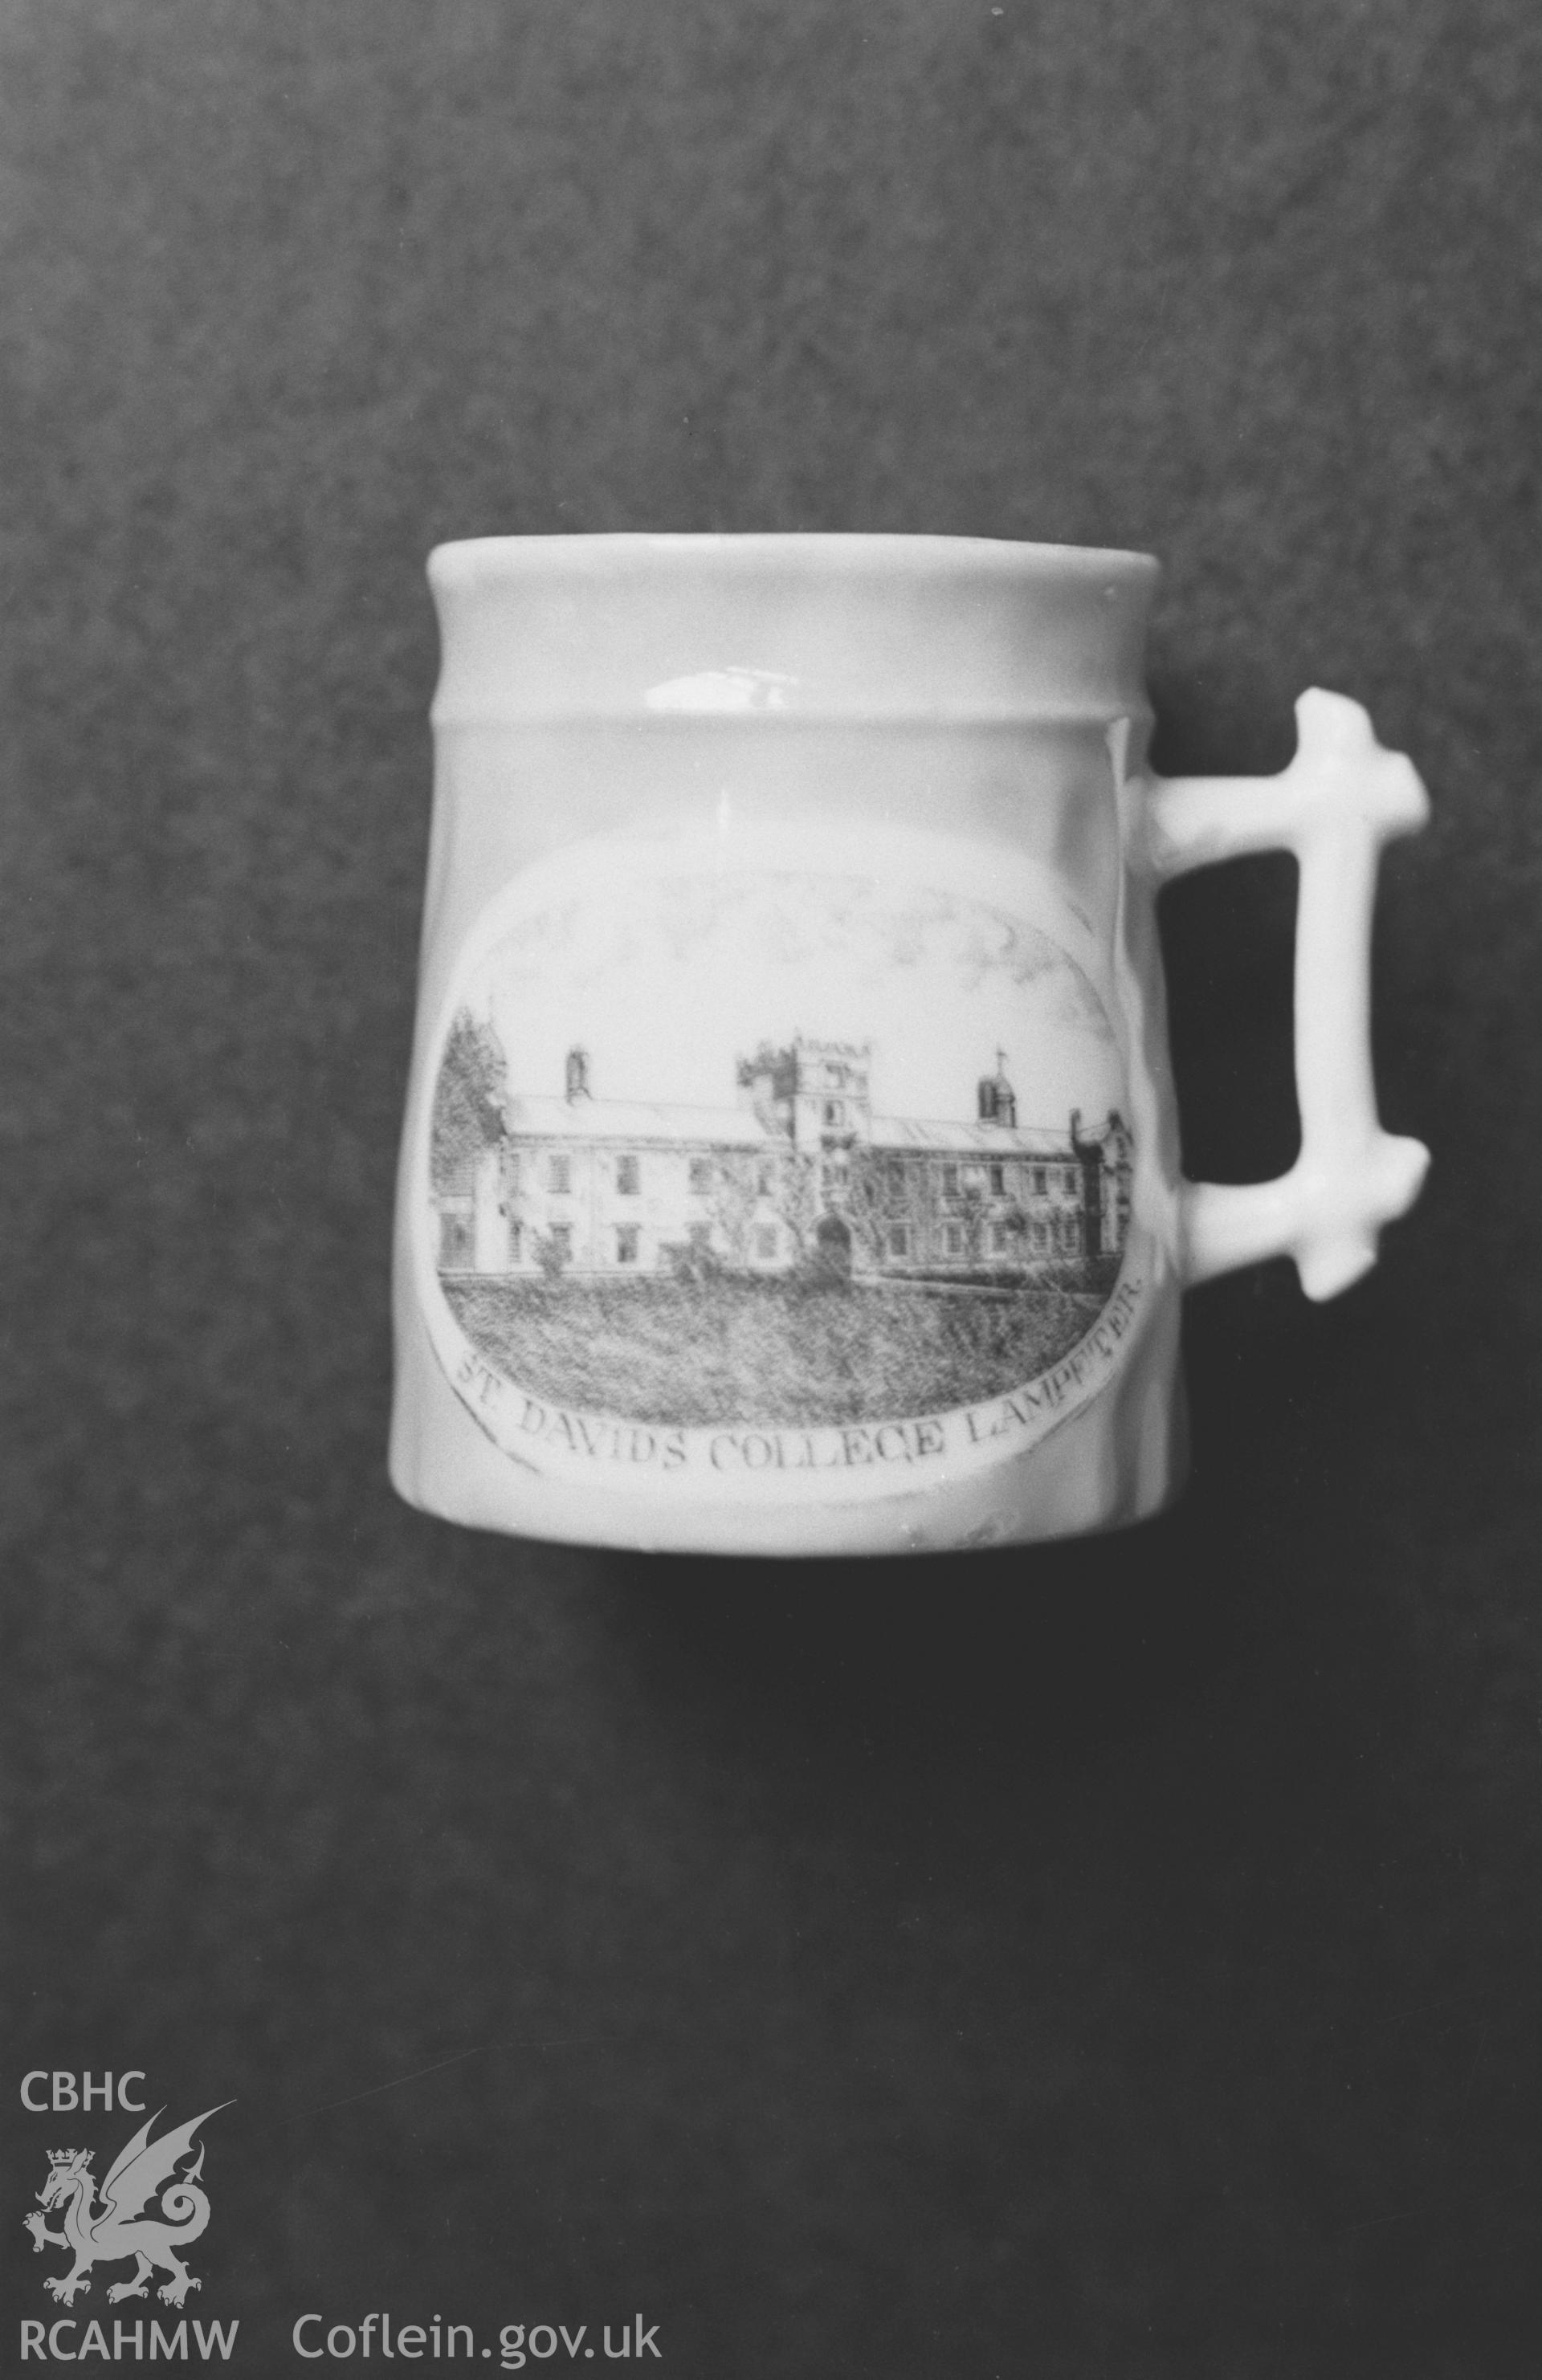 Digital copy of a black and white negative showing a china mug depicting St David's college, Lampeter. Photographed by Arthur O. Chater in January 1968.